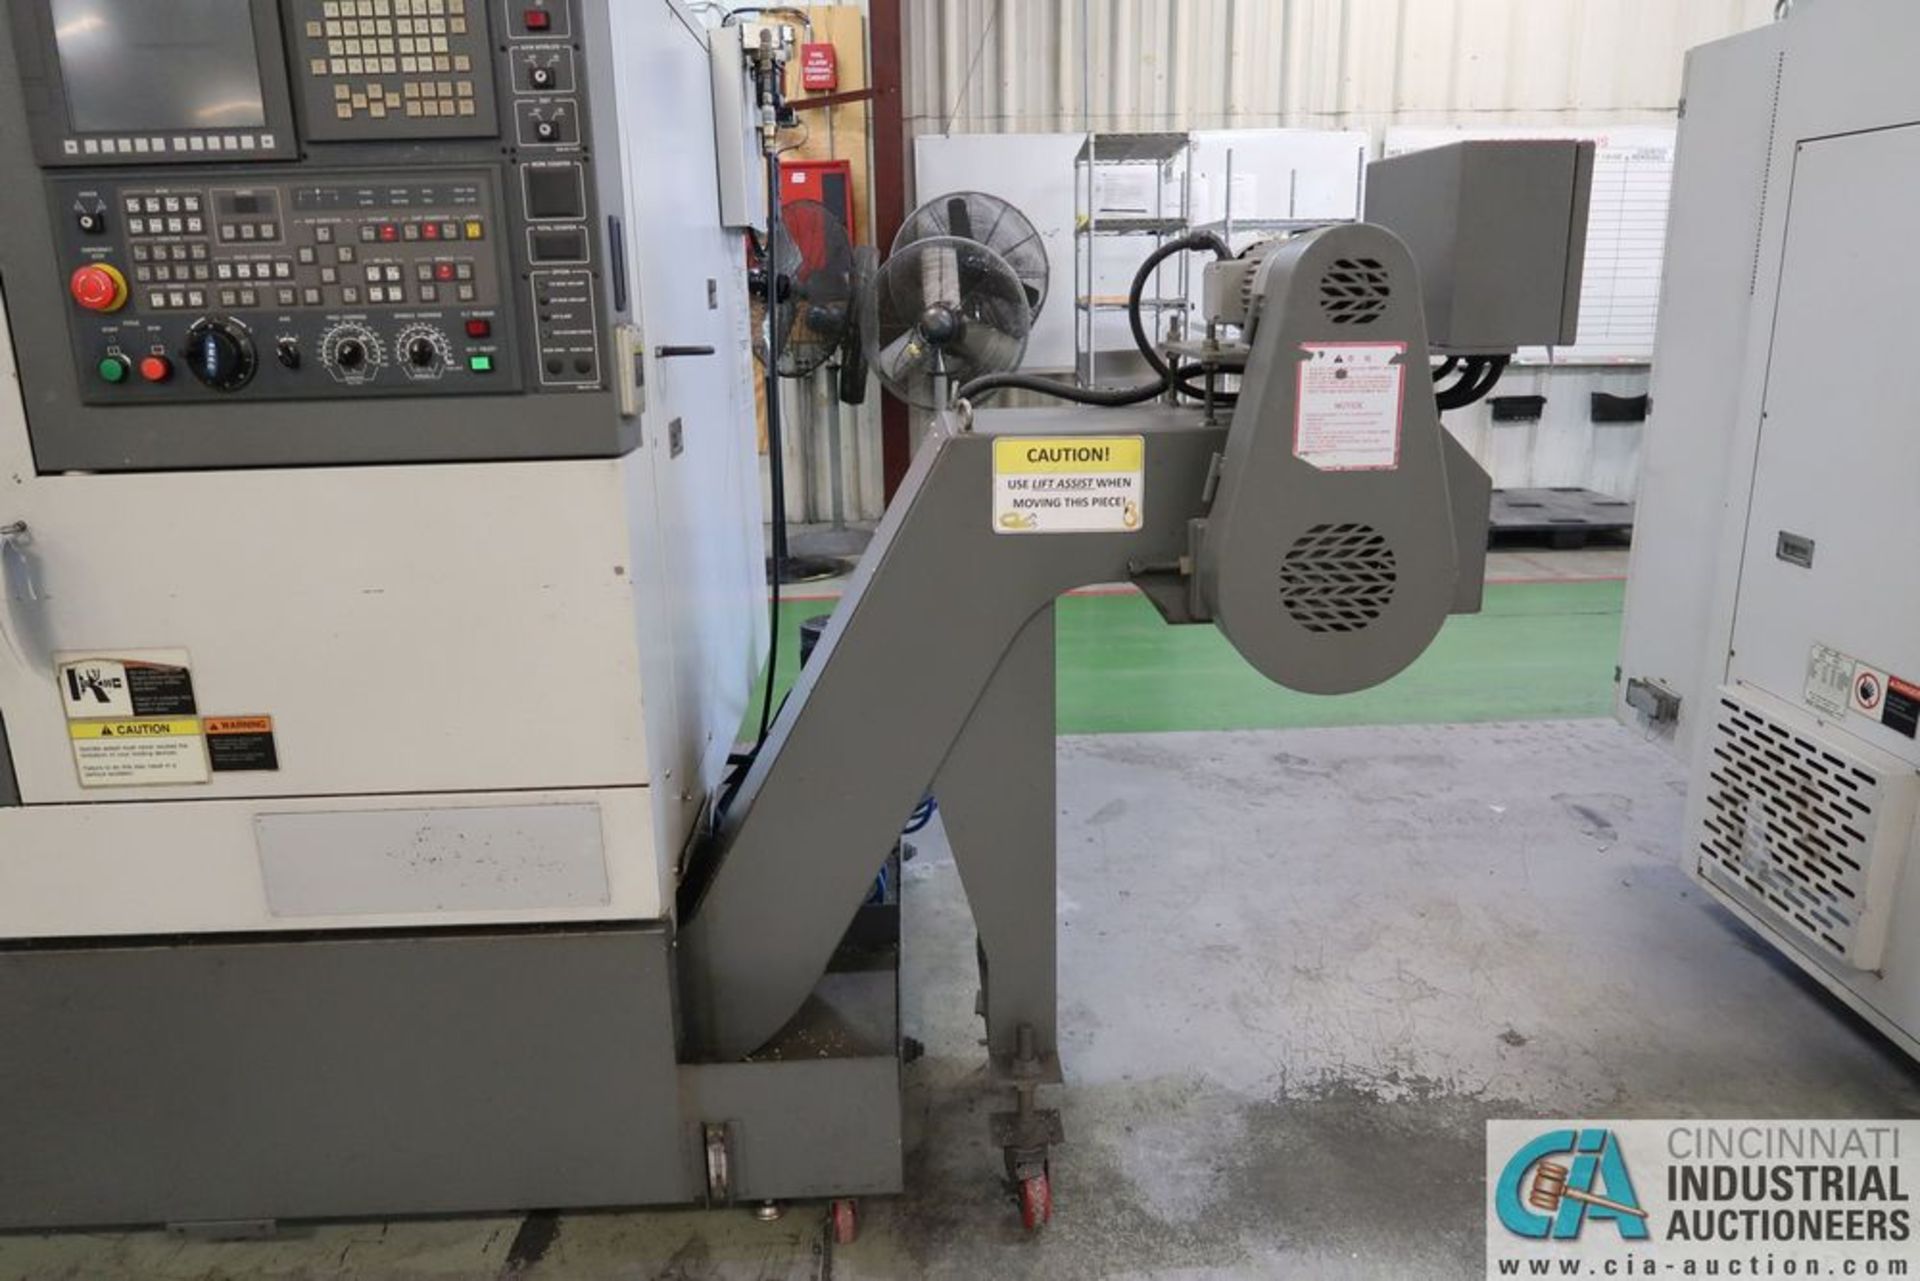 SAMSUNG SL20/500 CNC TURNING CENTER; S/N 12H440853, 8" 3-JAW CHUCK, **Rigging Fee Due $500.00** - Image 11 of 14